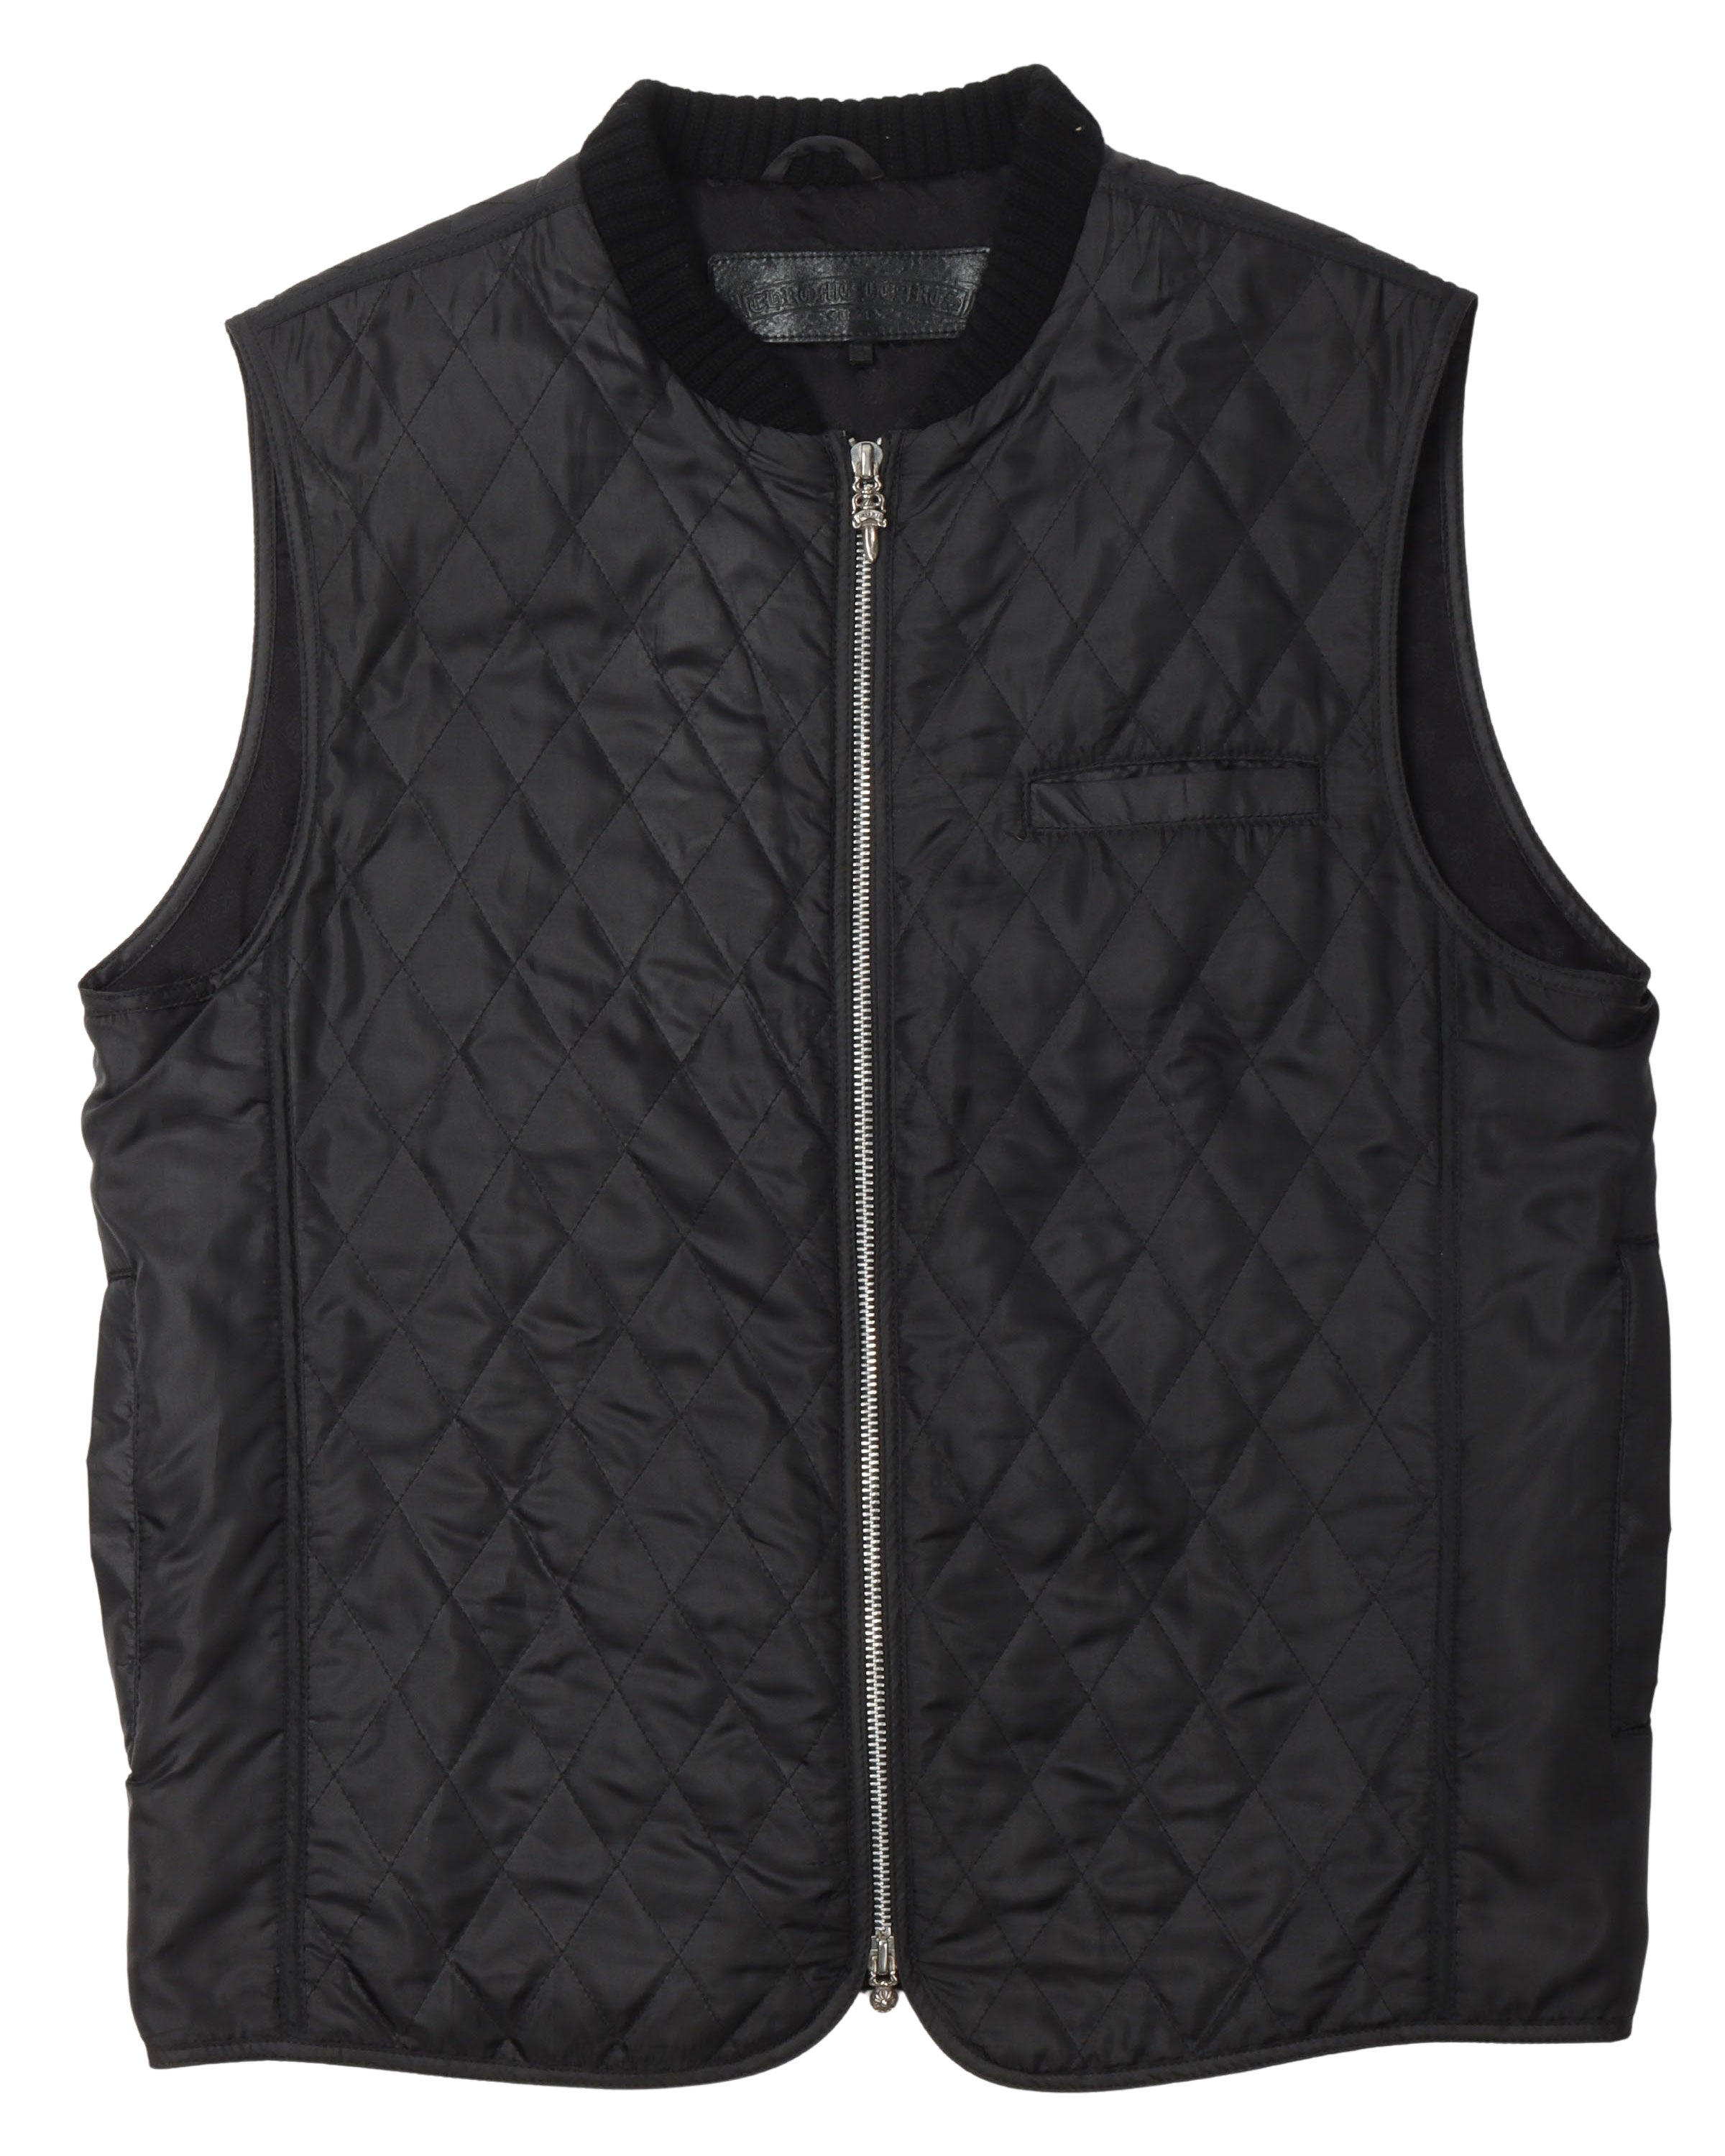 Chrome Hearts Quilted Vest With Spine Crosses